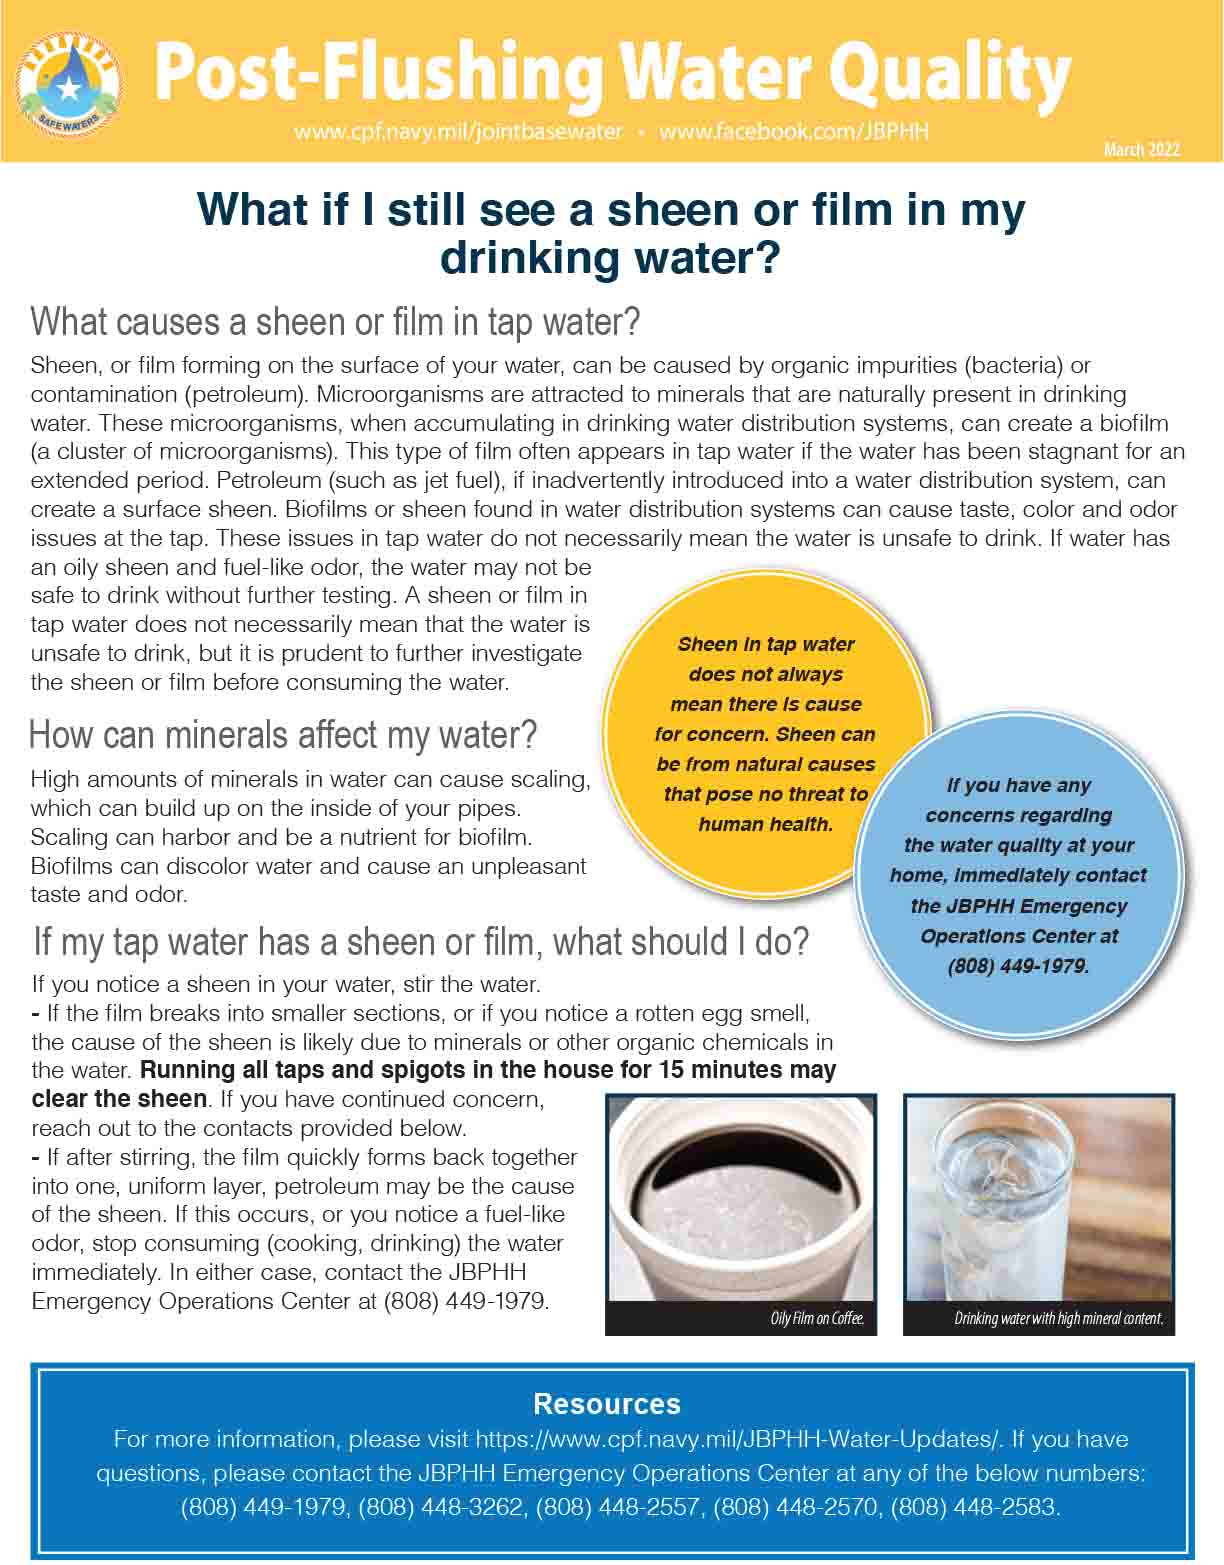 Post-Flusing Water Quality fact sheet